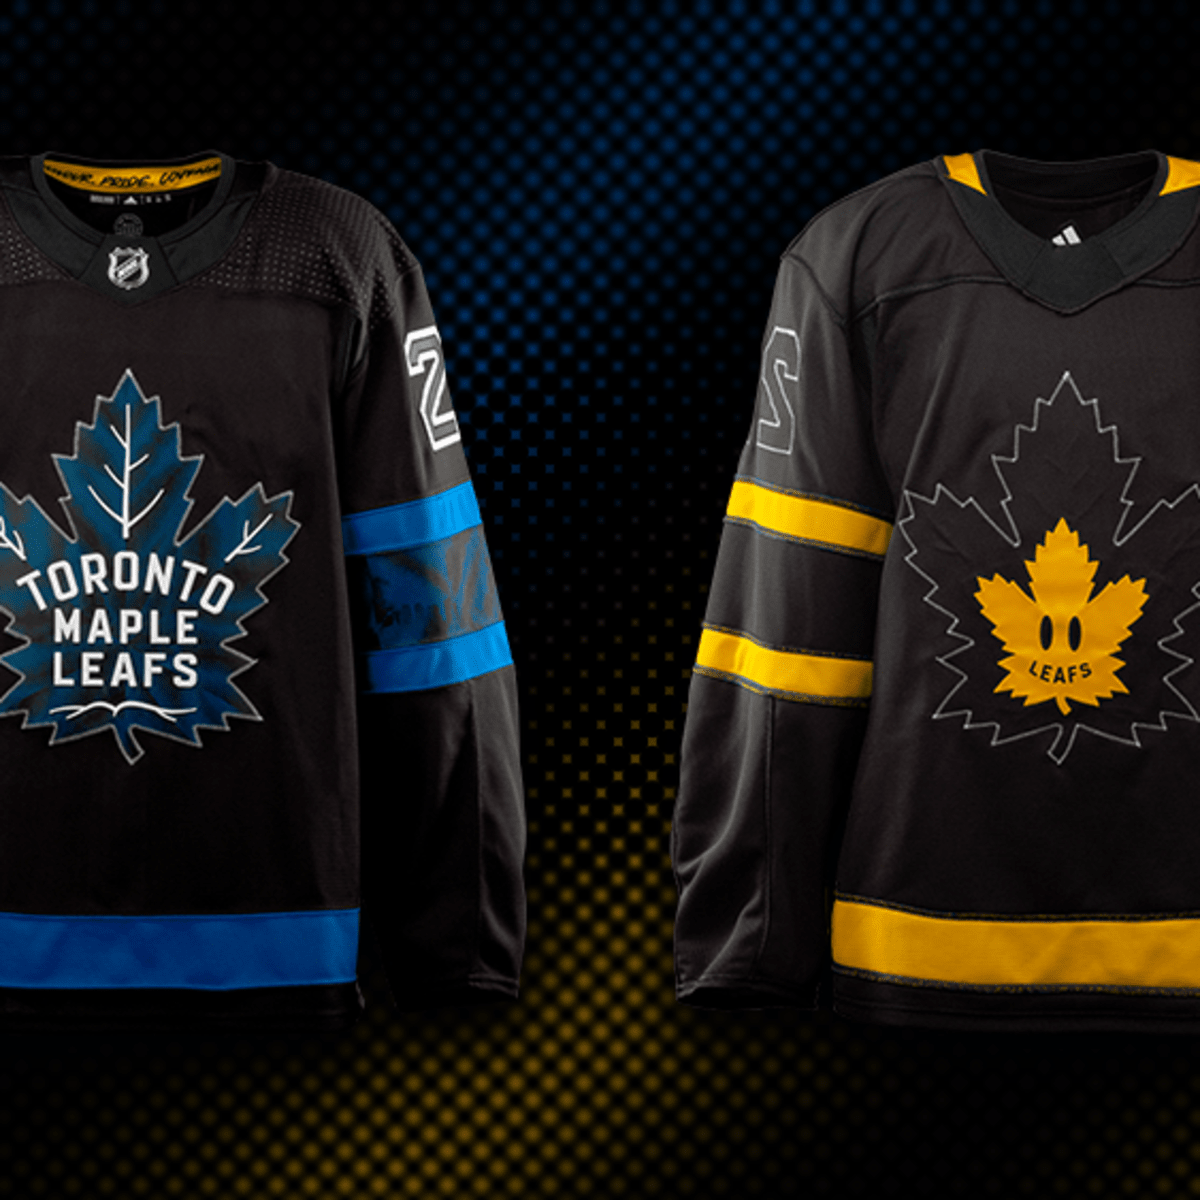 Maple Leafs jerseys and hats : r/AnimalCrossing